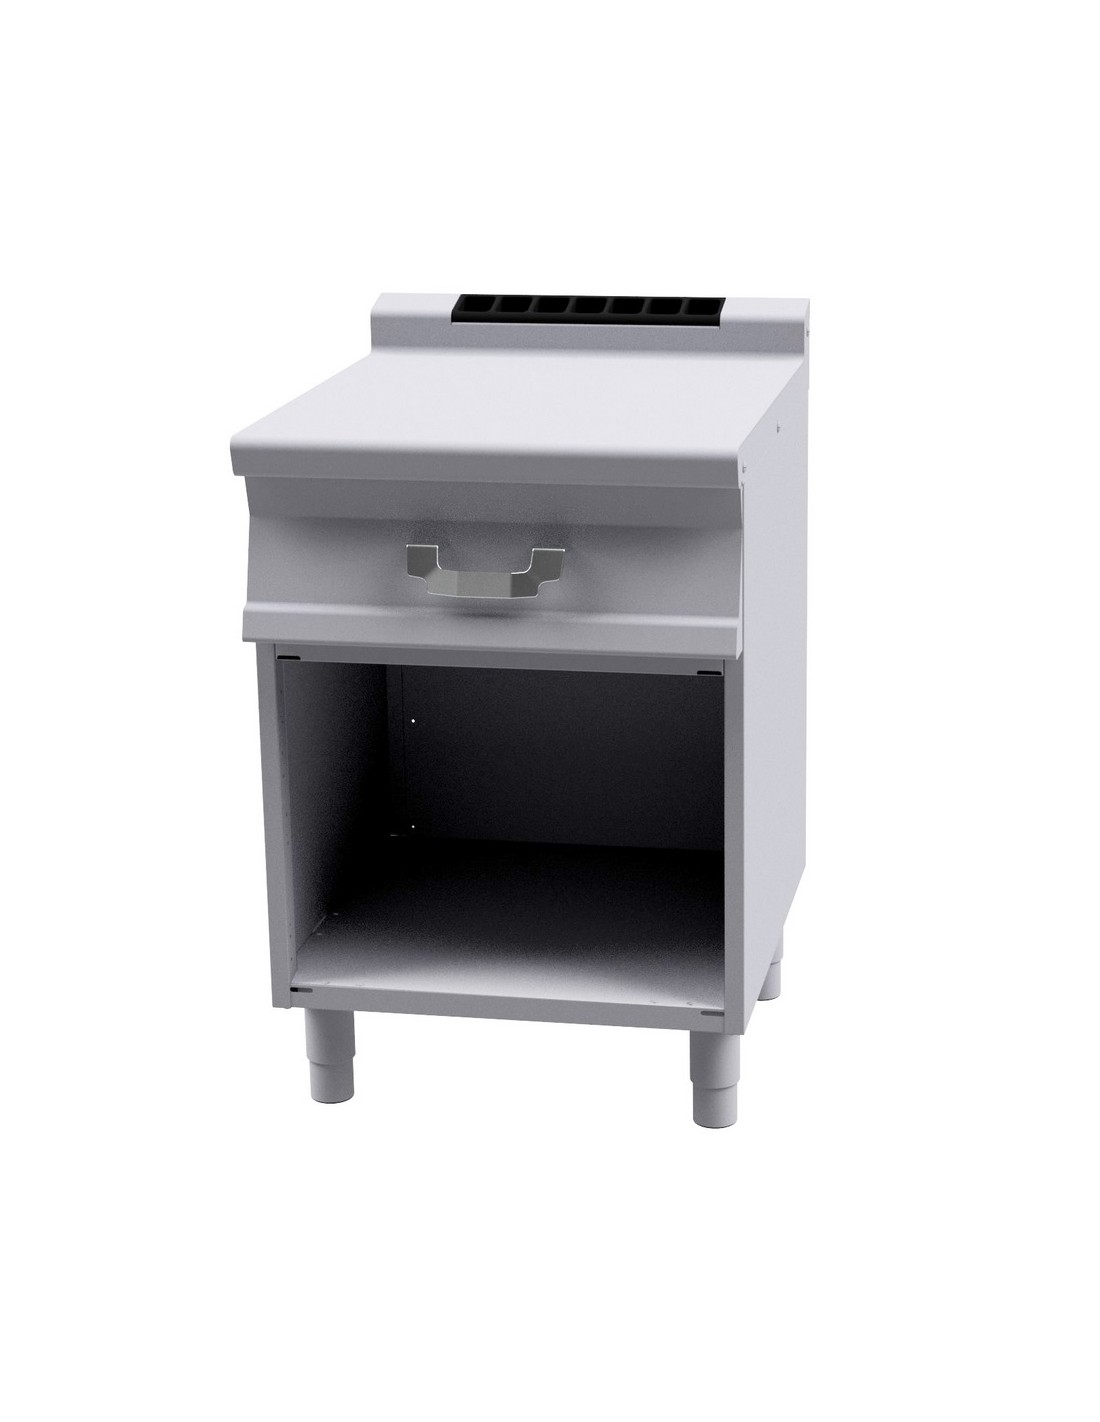 Neutral element on mobile per day - Drawer and no. 1 stainless steel box - cm 60 x 70,5 x 90 h